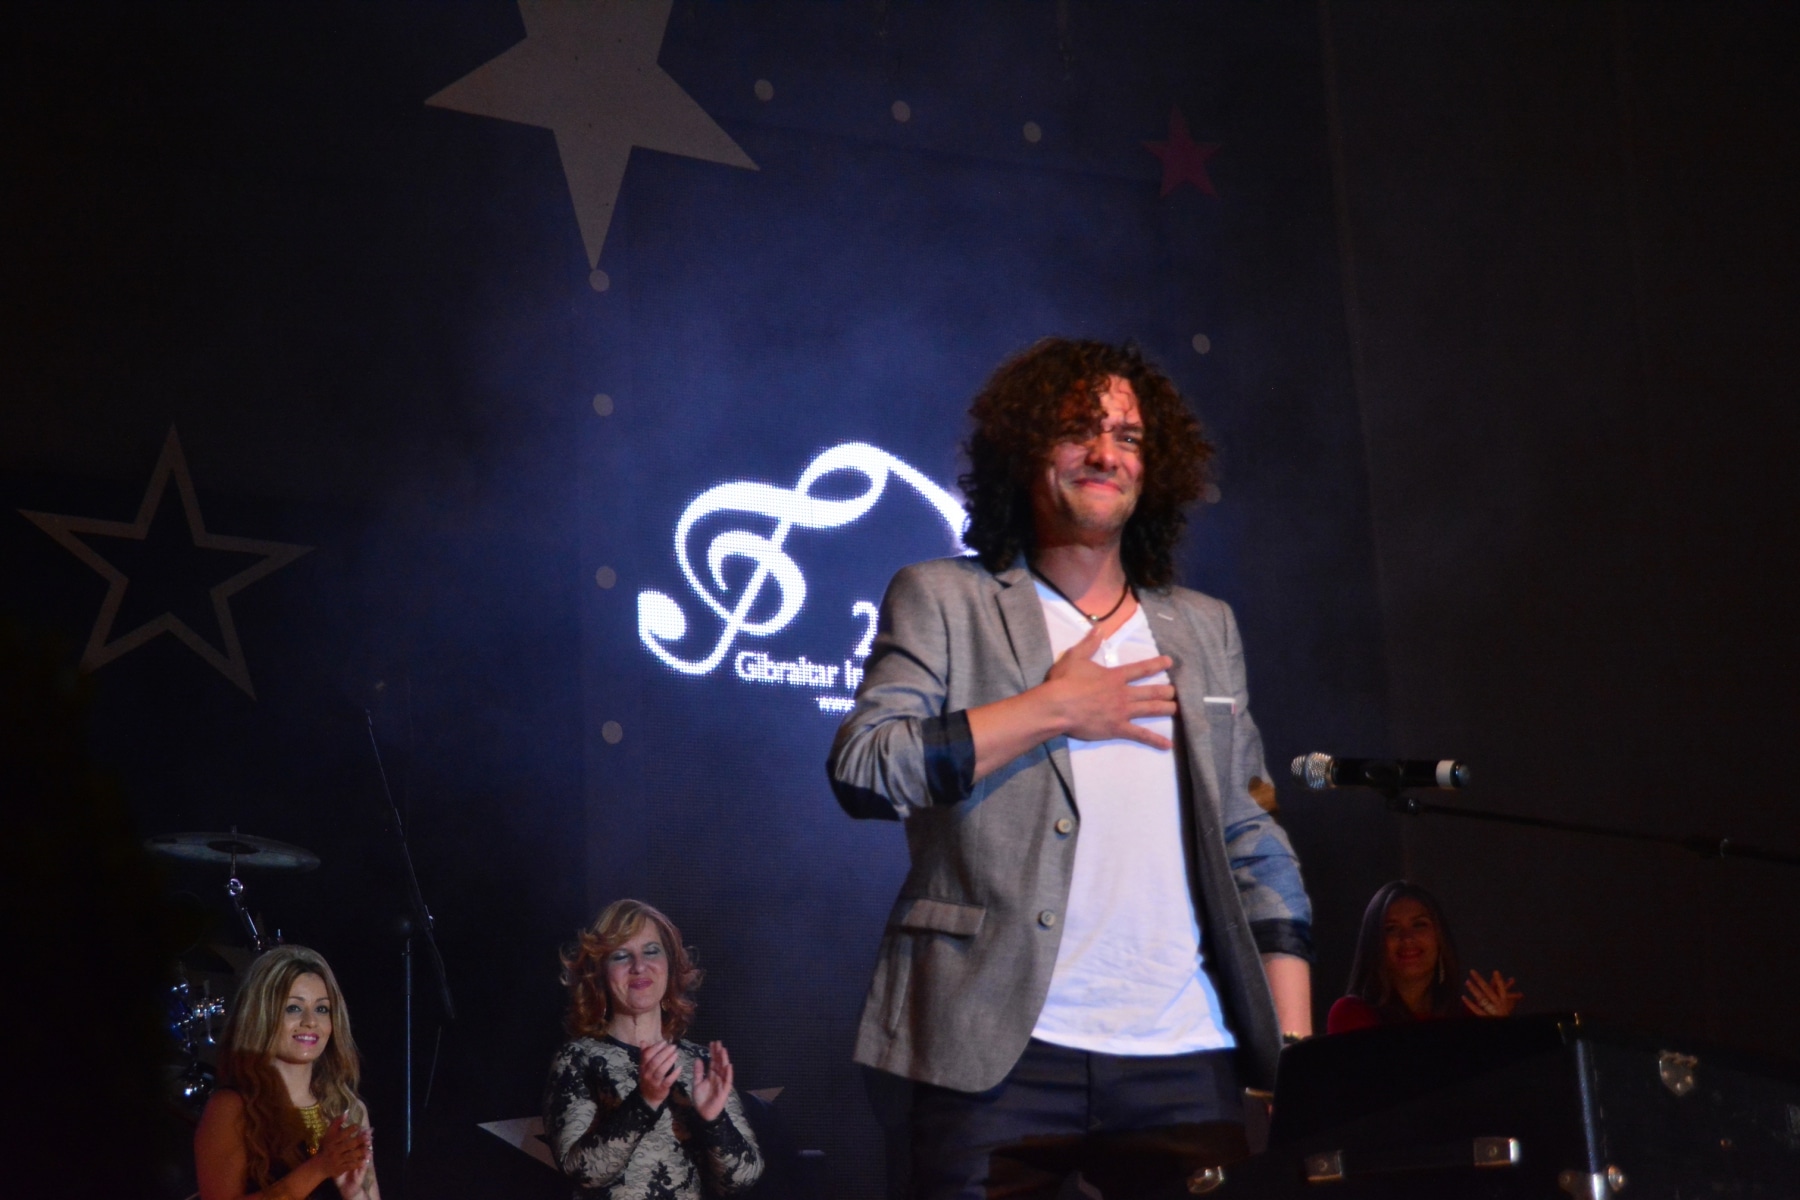 Gibraltar - 9th May 2015 - Mo Anton took the first prize at the V Gibraltar Song Festival held at the Tercentennary Sports Hall in Gibraltar.Fourteen singers competed in the final from across the world following over 700 entries. Among the singers were Greeks, French, Israeli, Spanish, Irish and Gibraltarian singers,